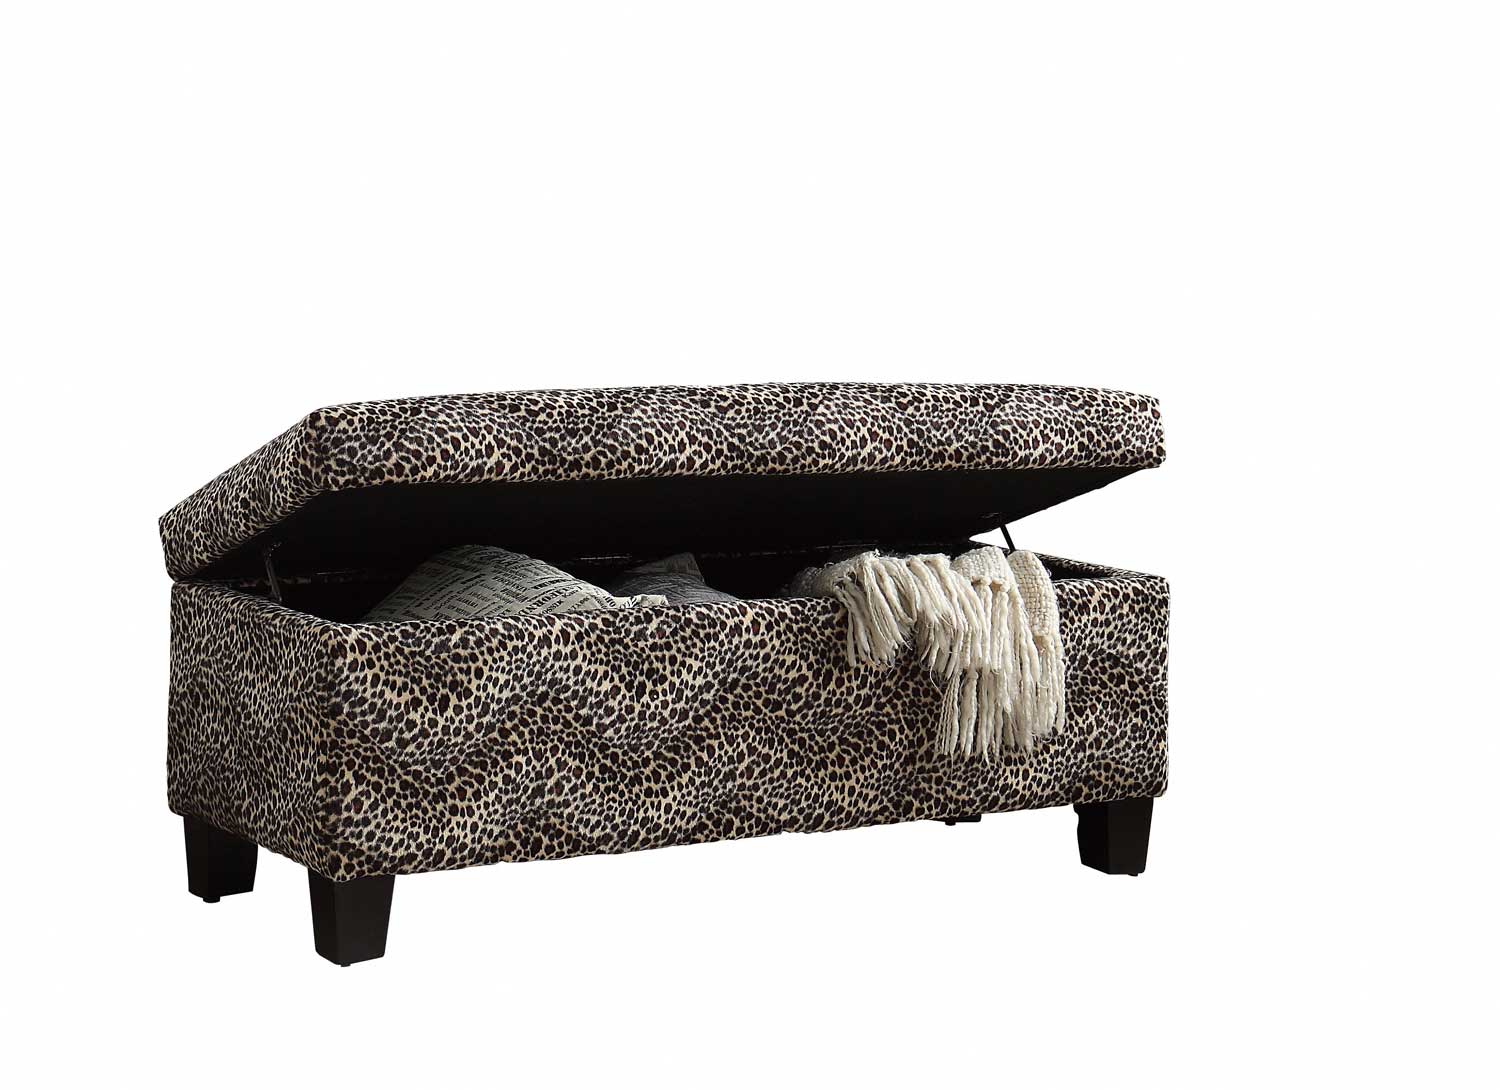 Homelegance Claire Lift Top Storage Bench - Leopard Fabric